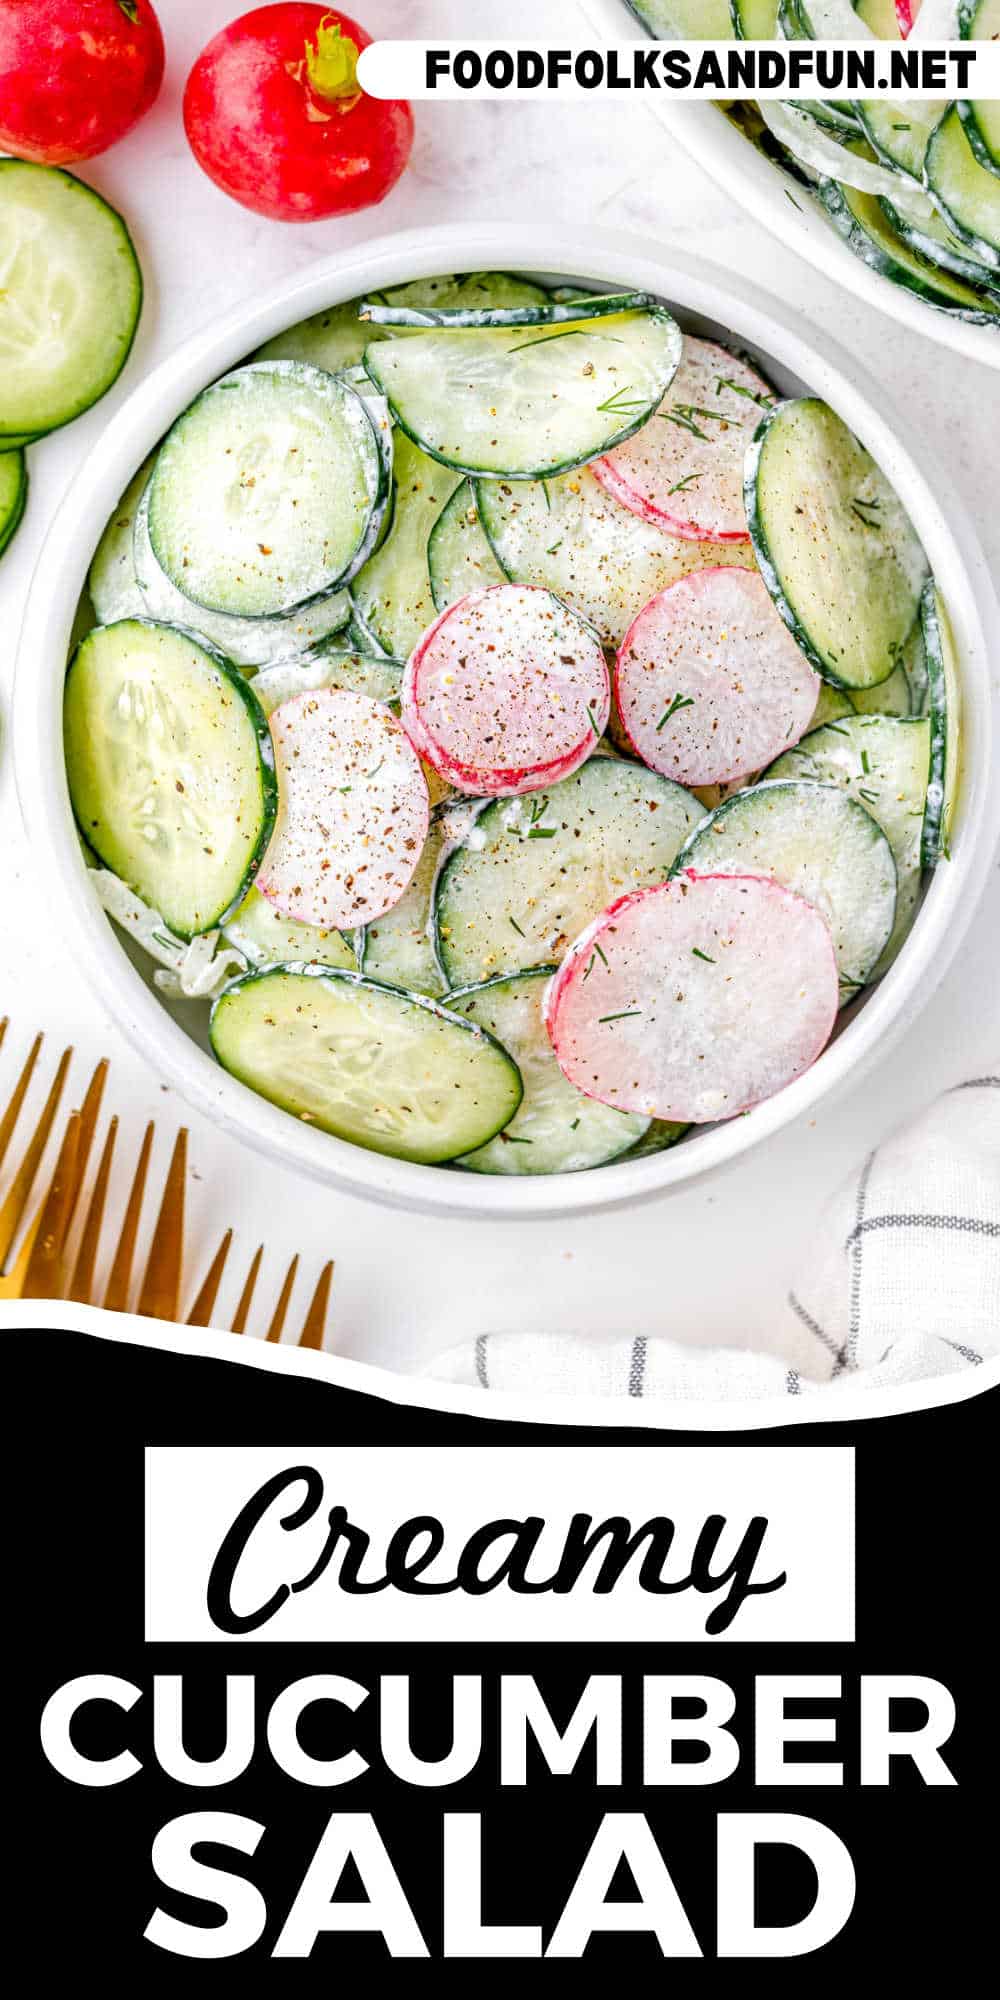 Make creamy cucumber salad for a refreshing, light, easy-to-prepare dish perfect for hot summer days. You'll love the crunch and creaminess! via @foodfolksandfun